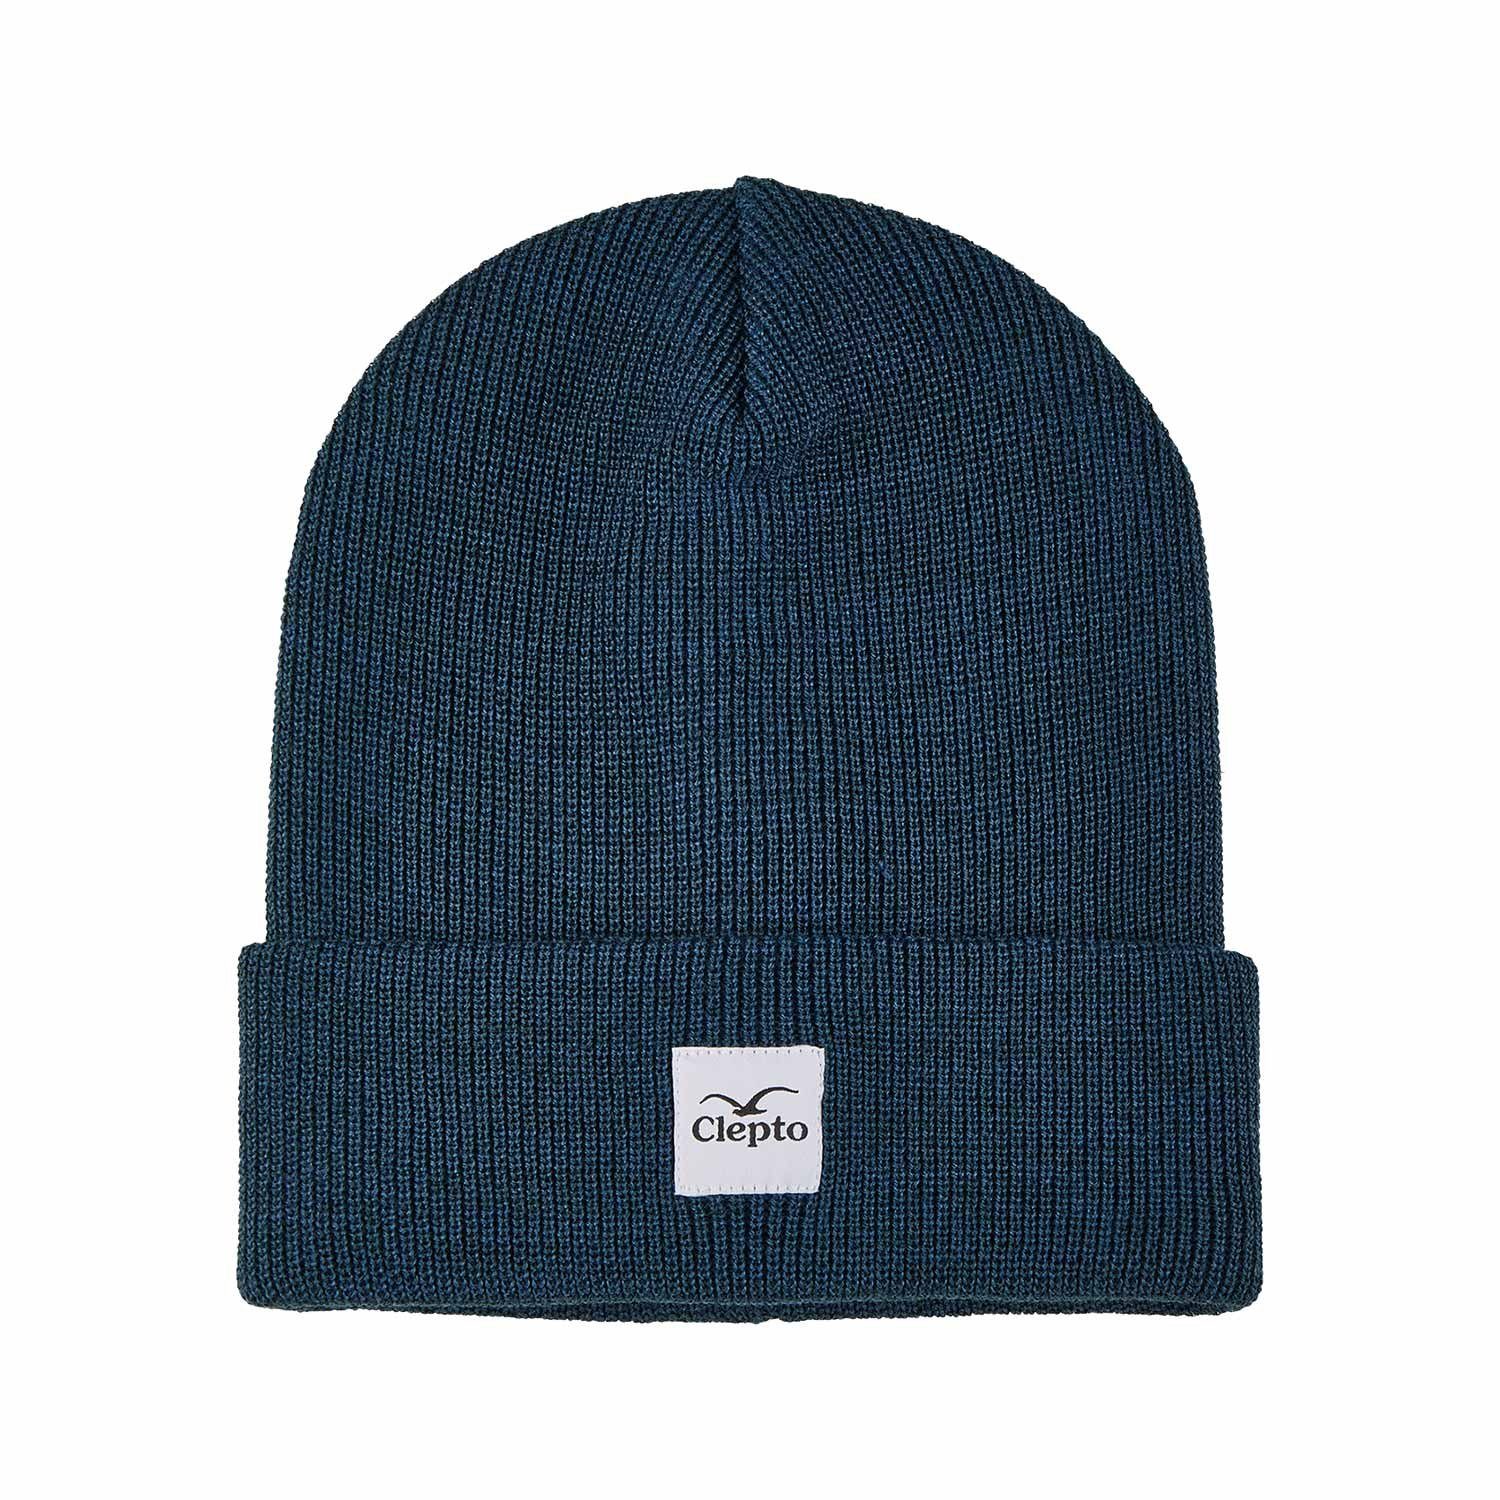 - Beanie blue wing Cleptomanicx Cimo